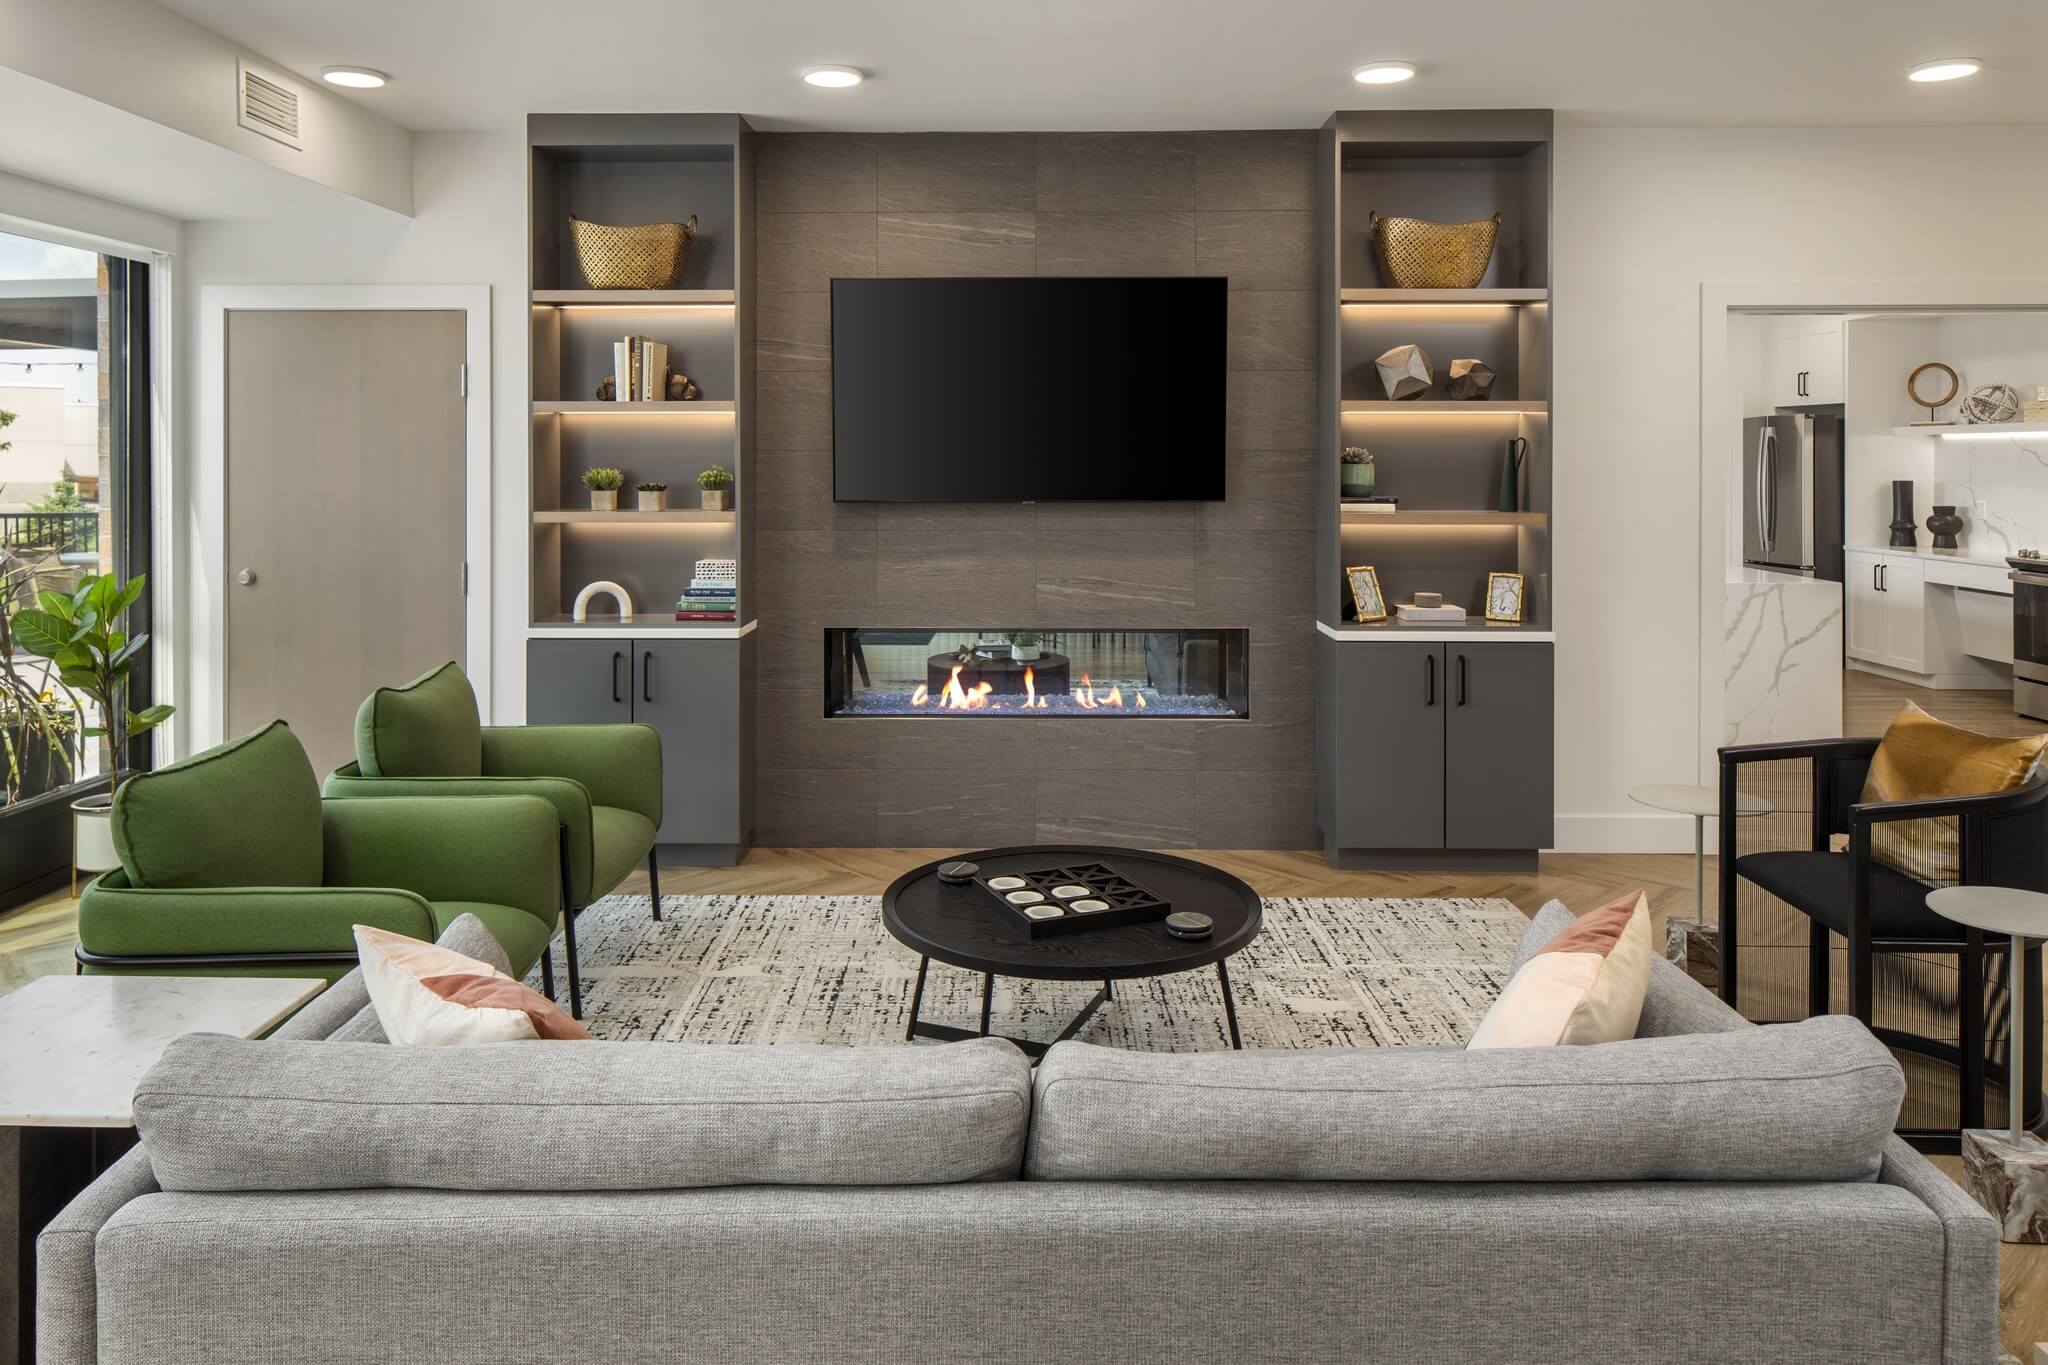 Aster at Riverdale Station amenity lounge with fireplace, large TV, and large couch